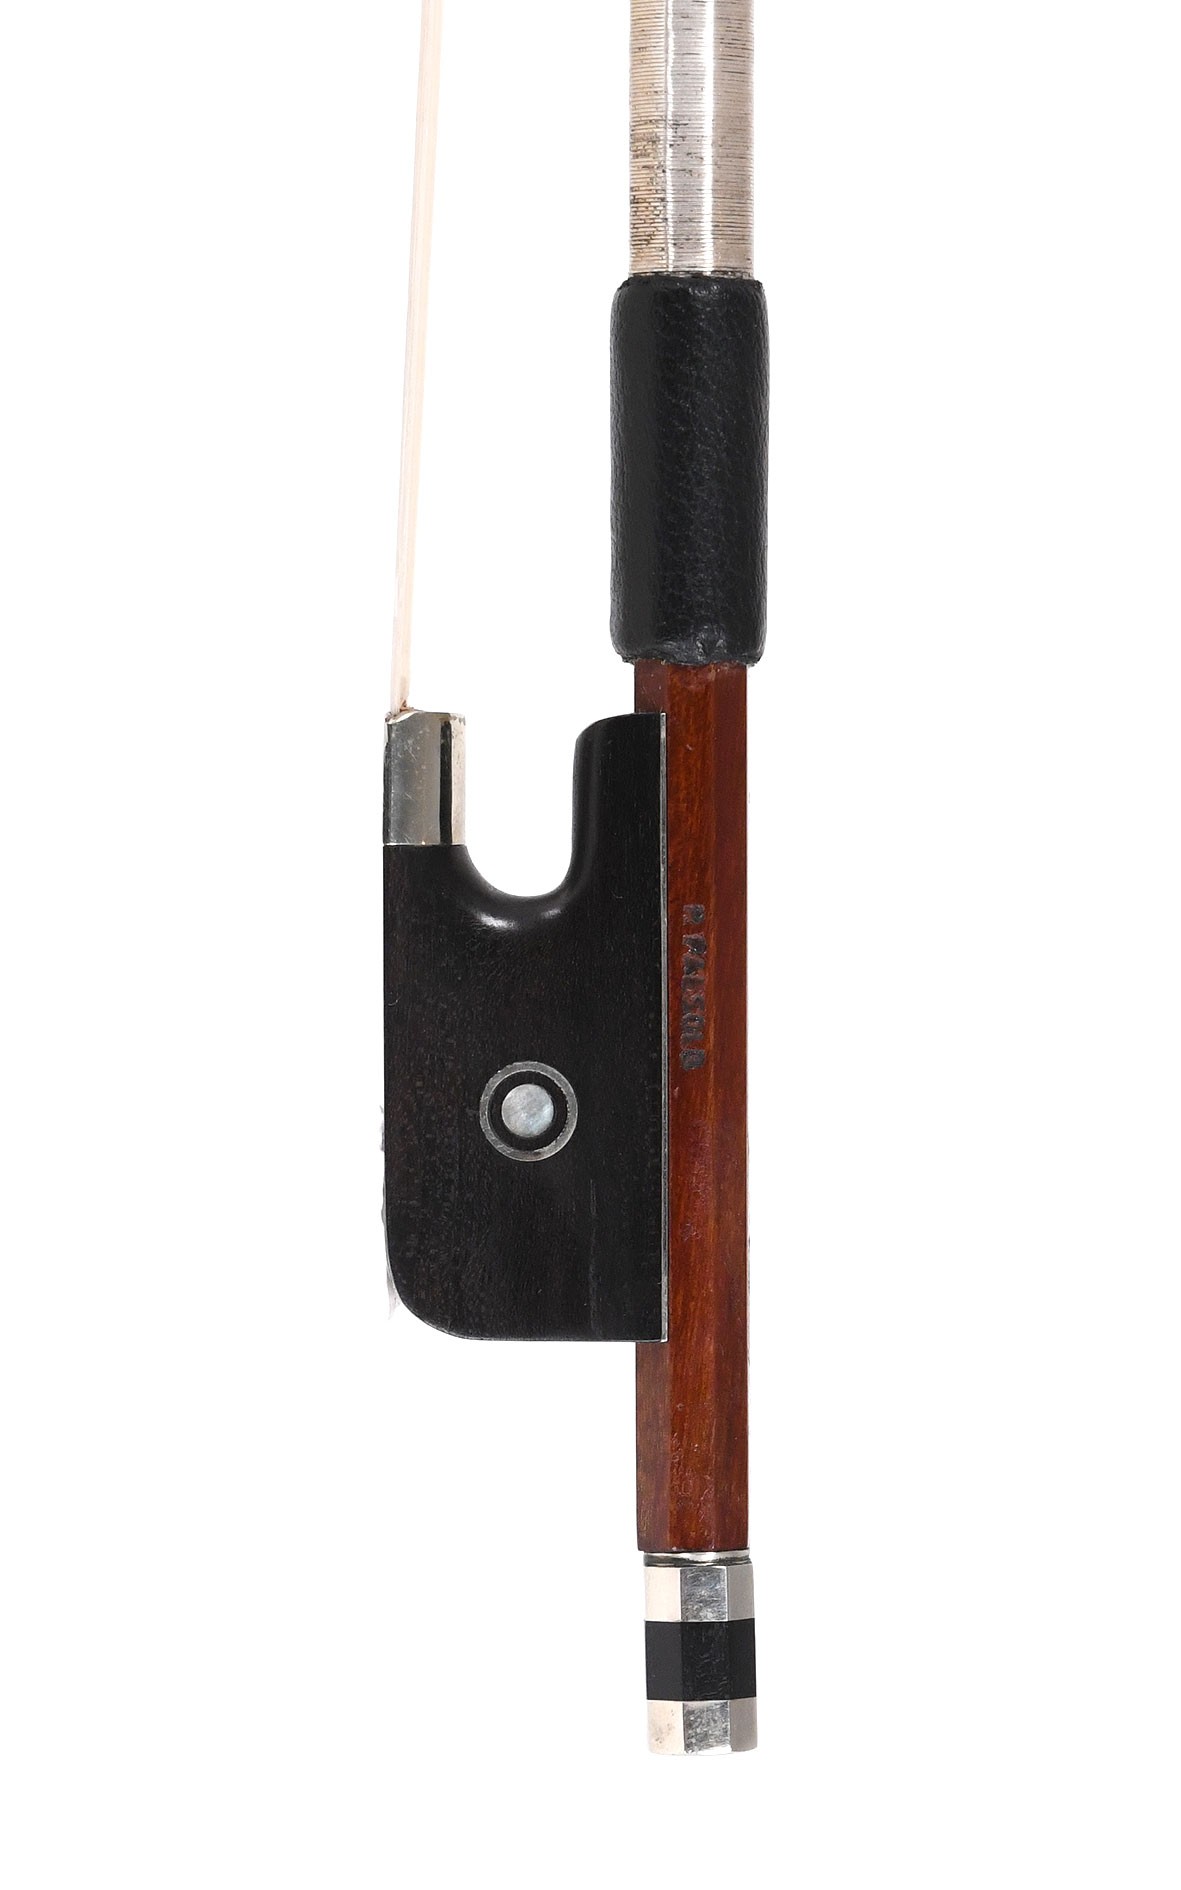 R. Paesold viola bow, silver mounted